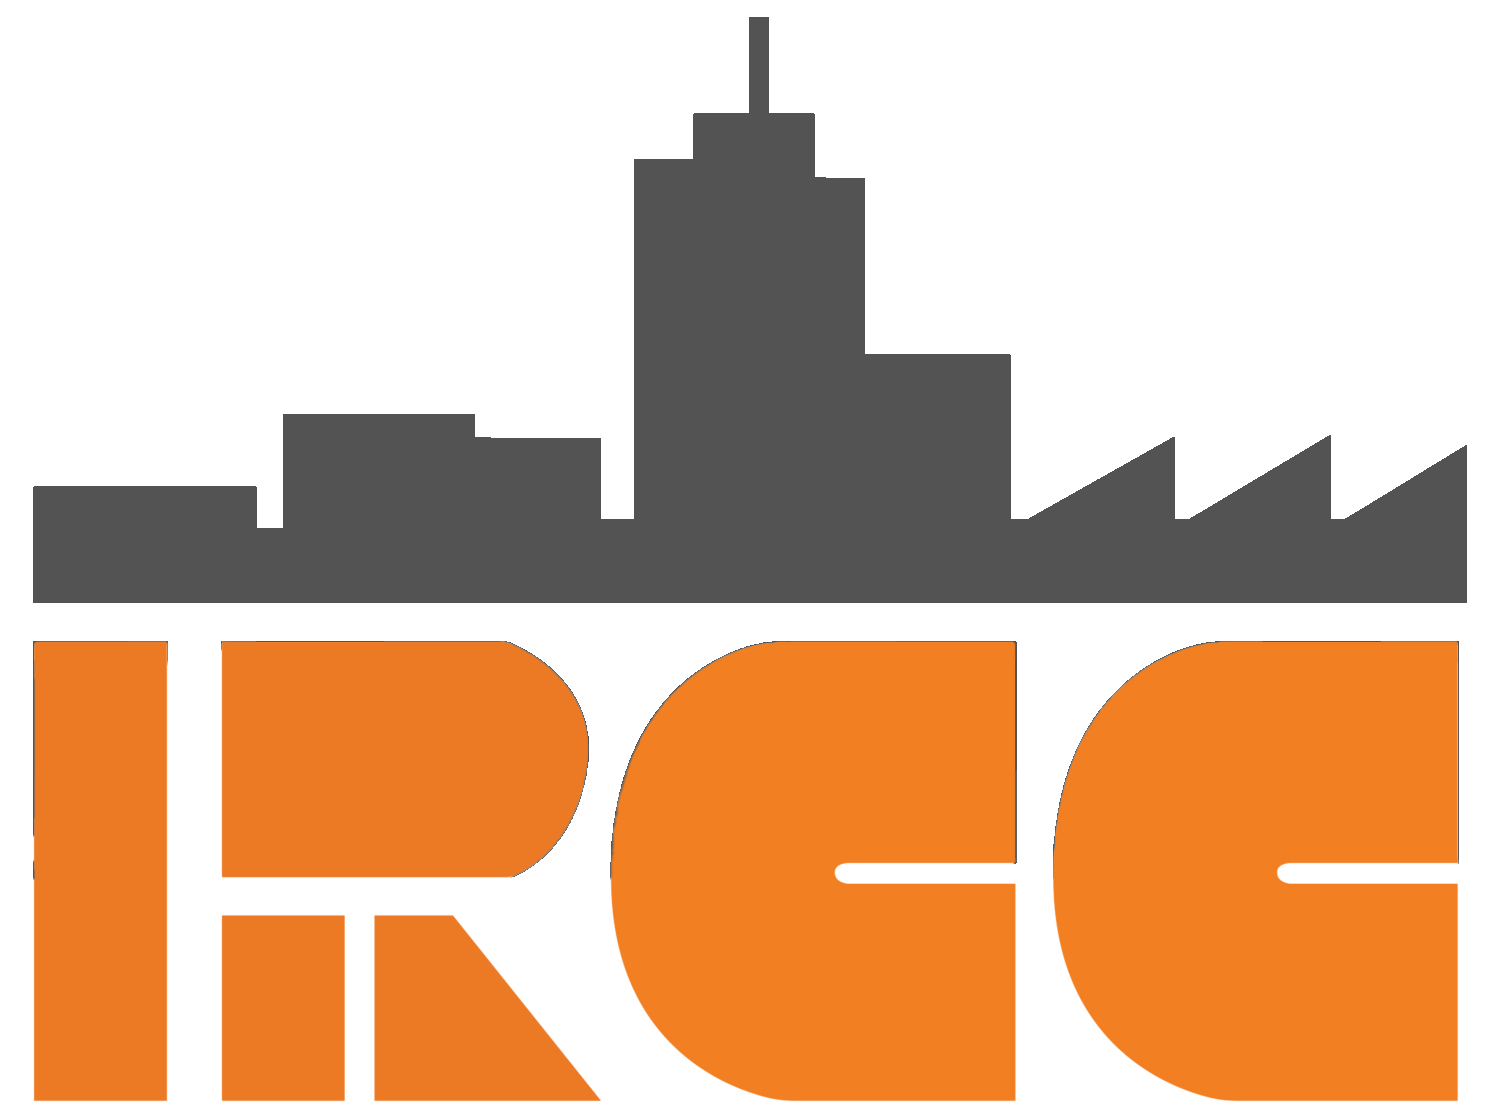 IRCC logo, which stands for the Independent Roofing Contractors Of California. The top part of the logo is a gray silhouette of a city. The bottom of the logo is orange bold letters that say "IRCC".